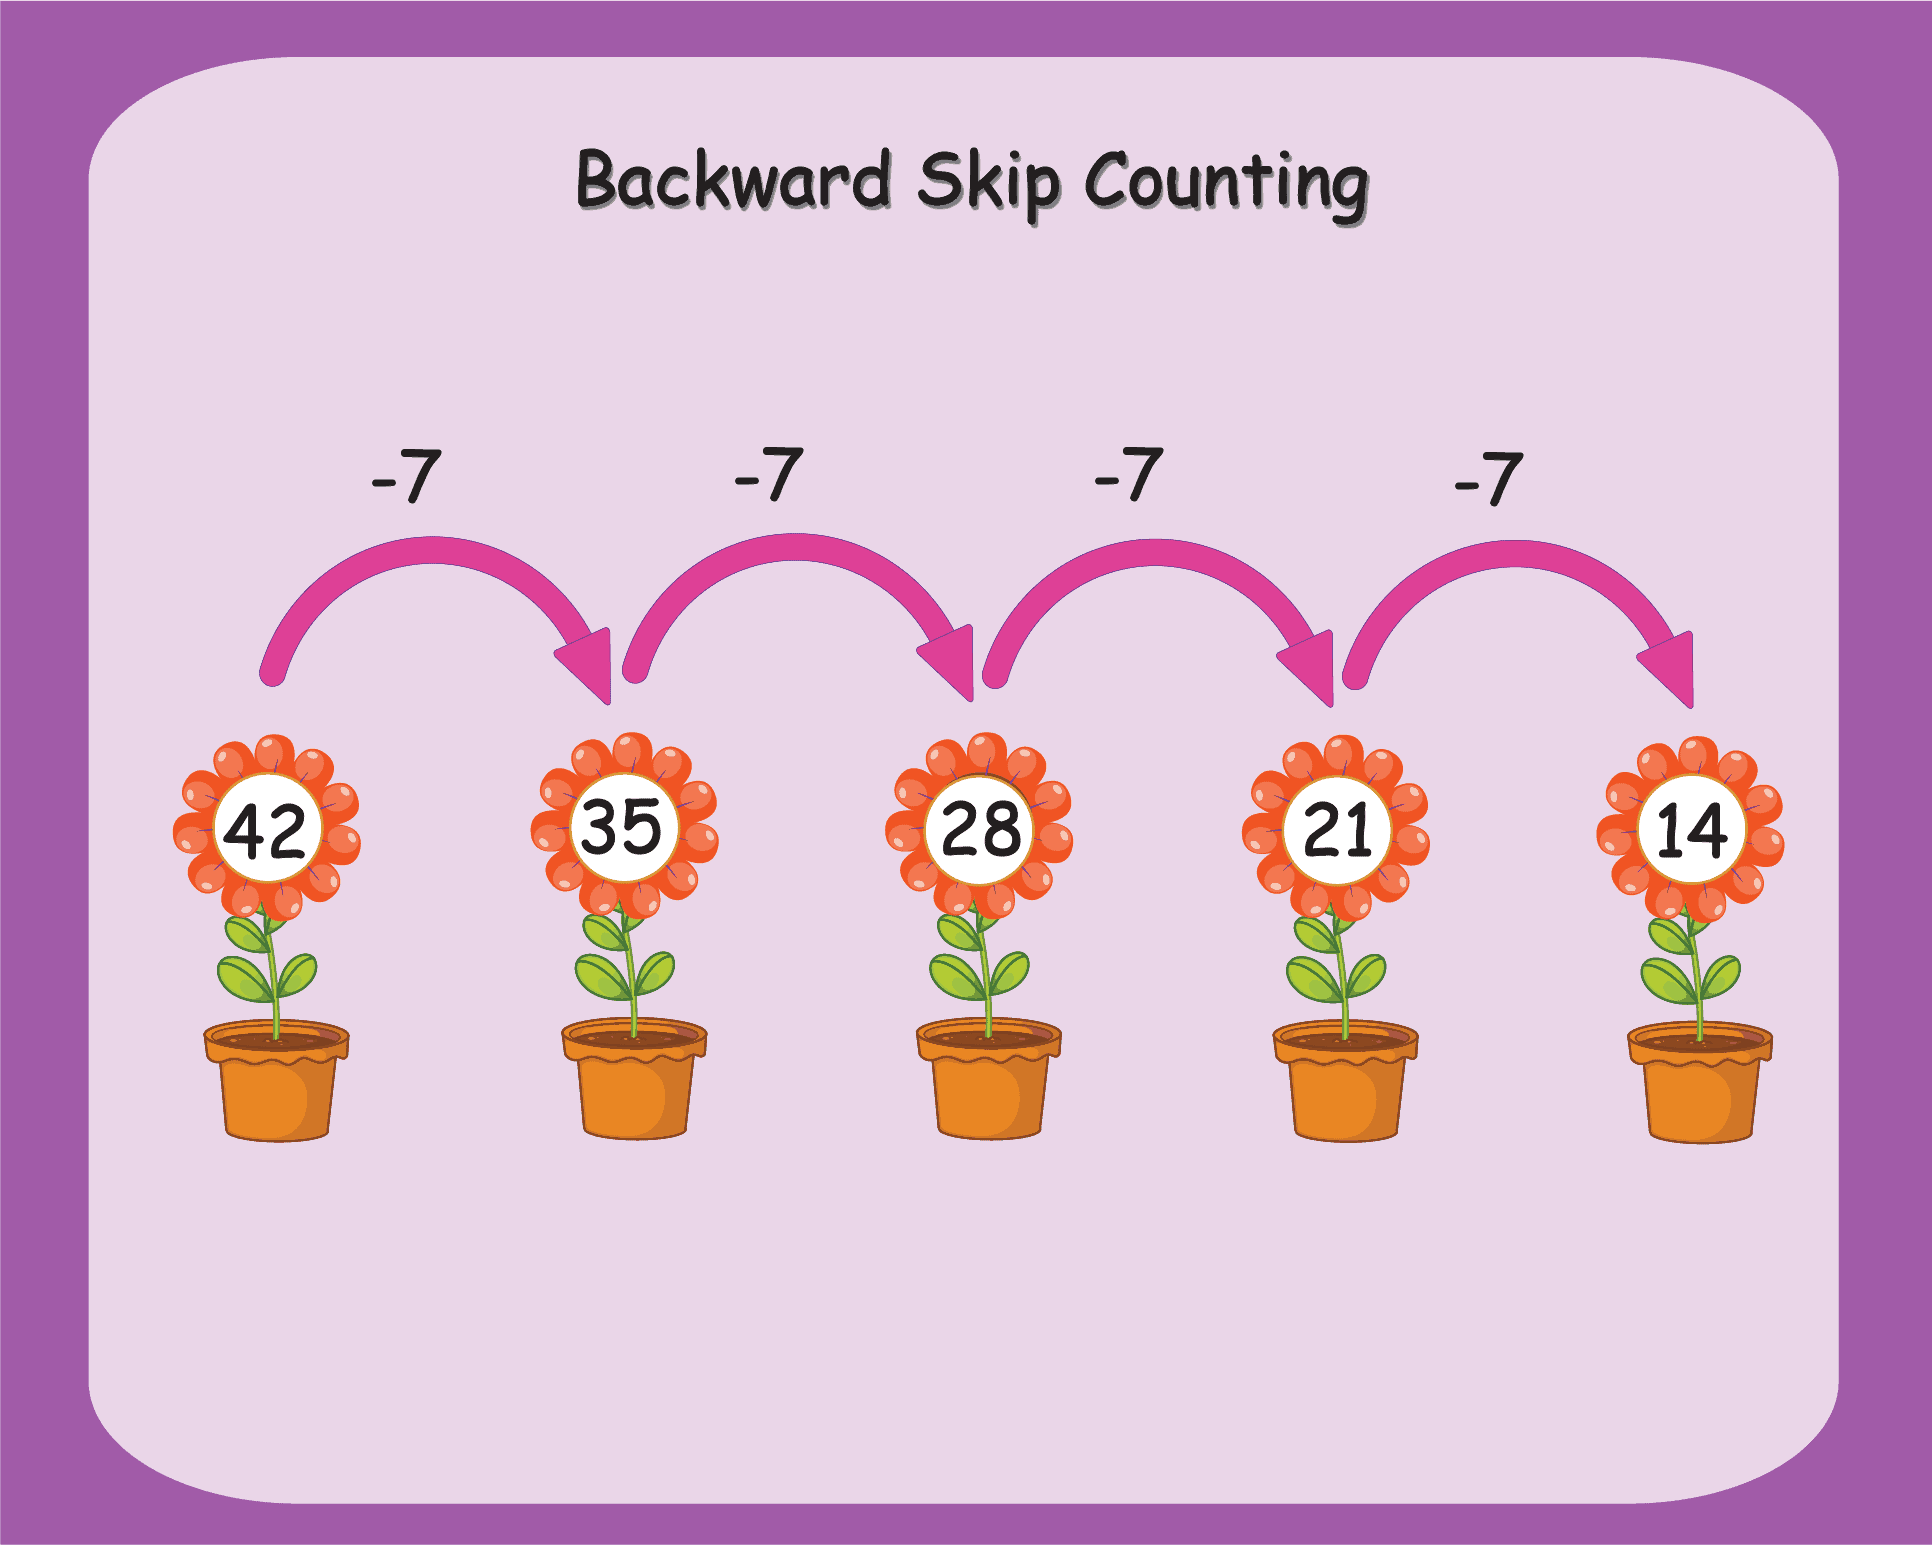 Backward skip counting overview